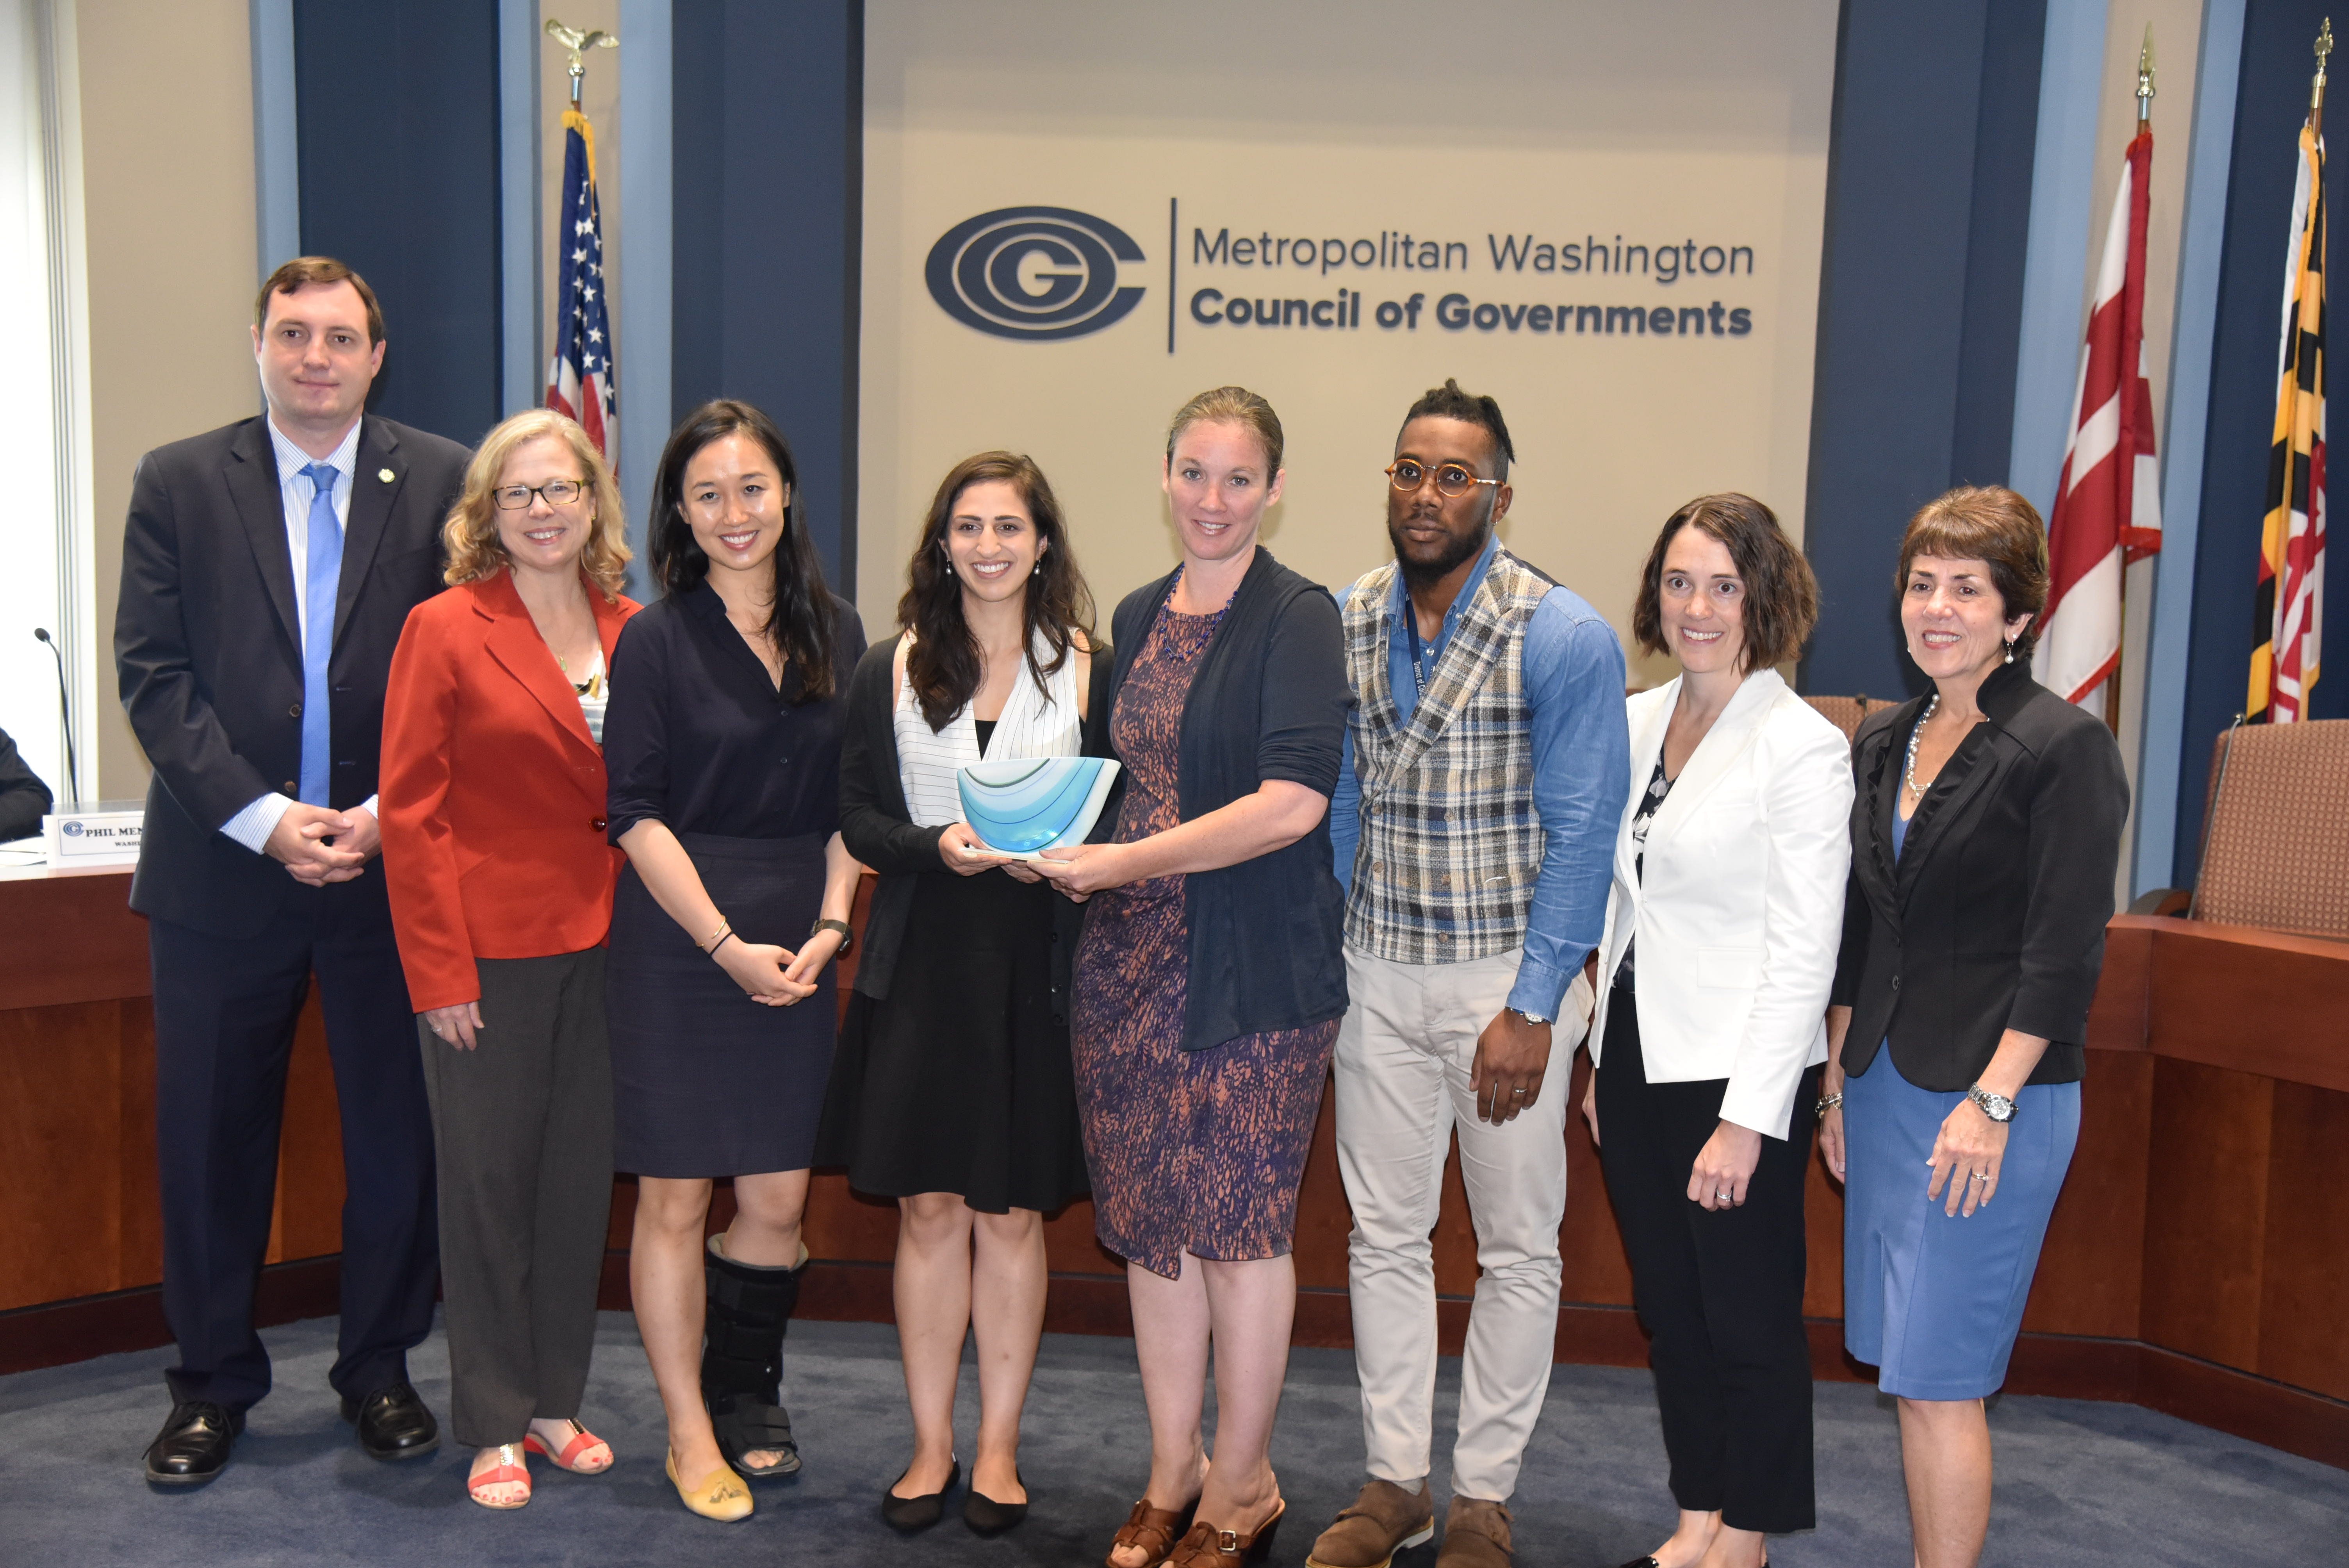 Metropolitan Council of Governments members Matt Letourneau, Gretchen Goldman, and Mary Lehman stand with Georgetown Climate Center staff Vicki Arroyo, Jennifer Li, and Jessica Grannis, and DC Department of Energy and Environment representatives Melissa Deas and Everette Bradford. They display the 2018 Climate and Energy Leadership Award.